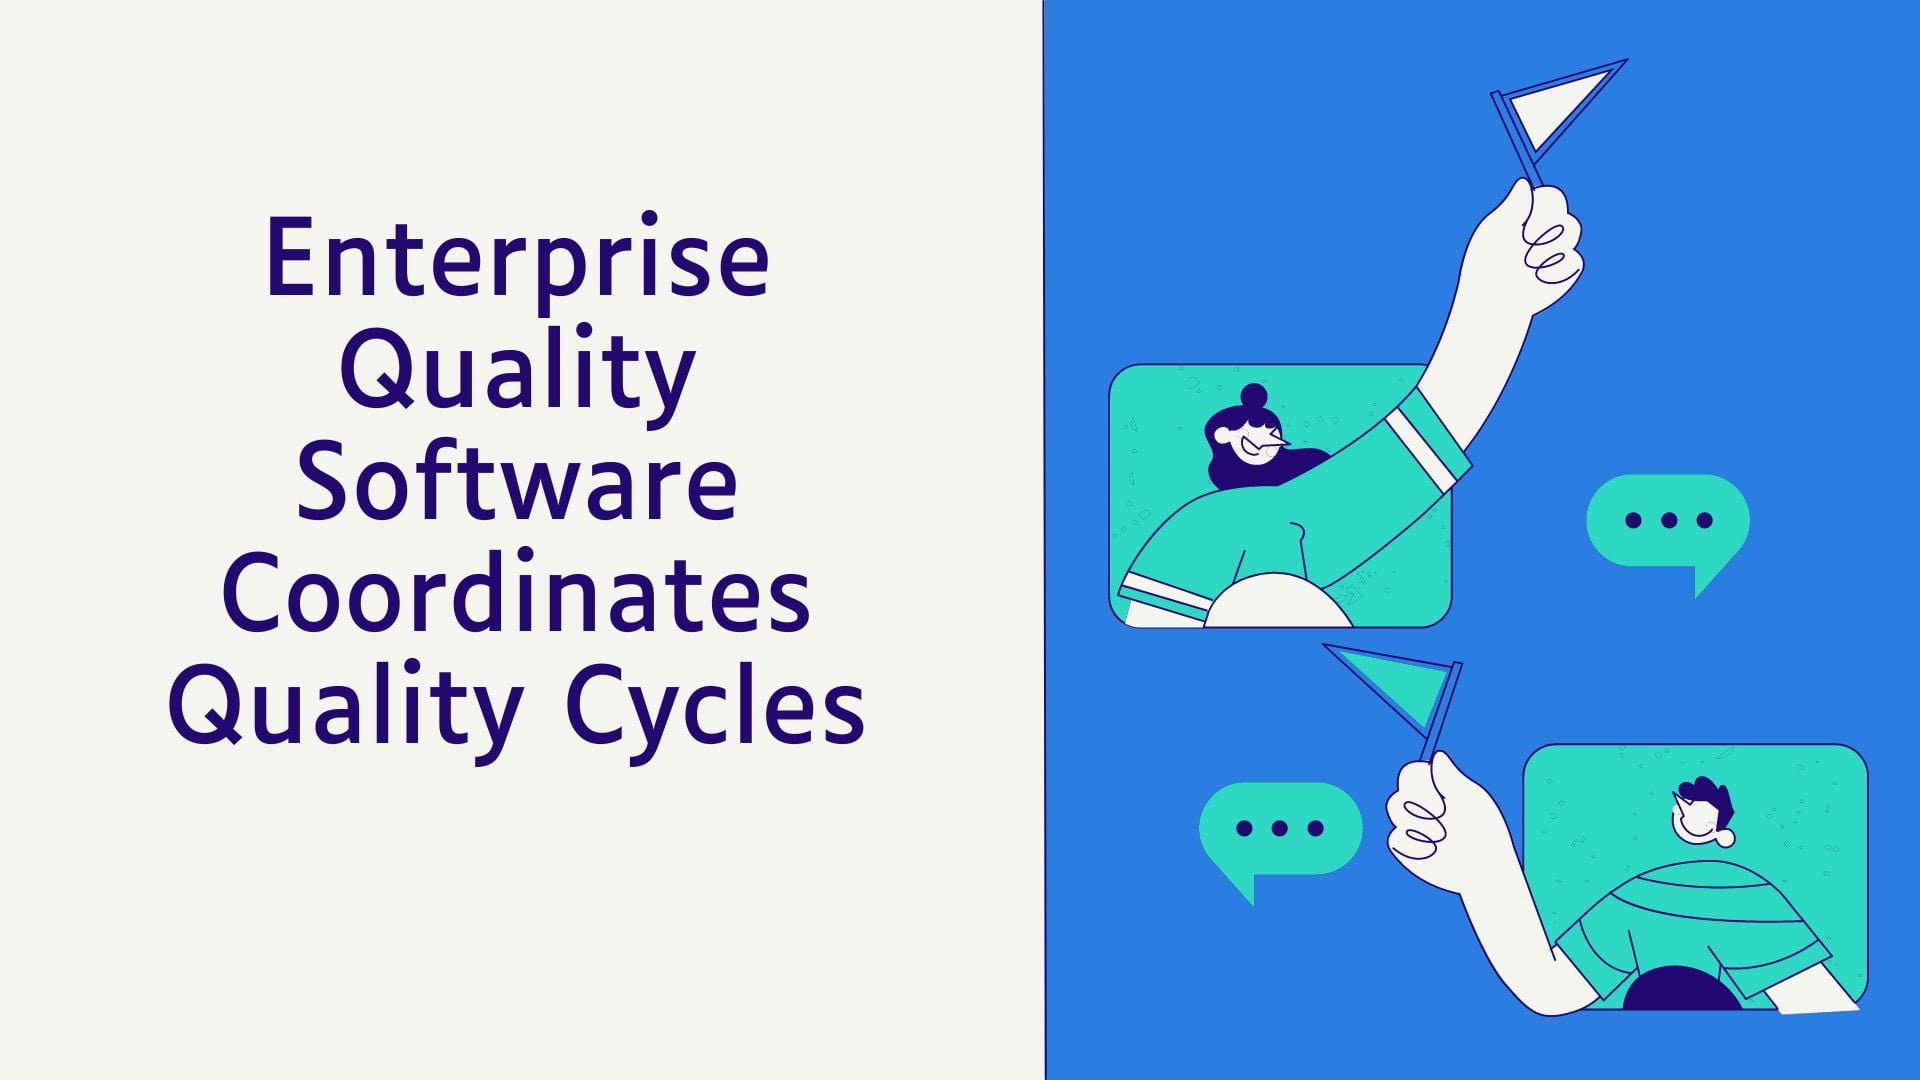 Enterprise Quality Software Coordinates Quality Cycles